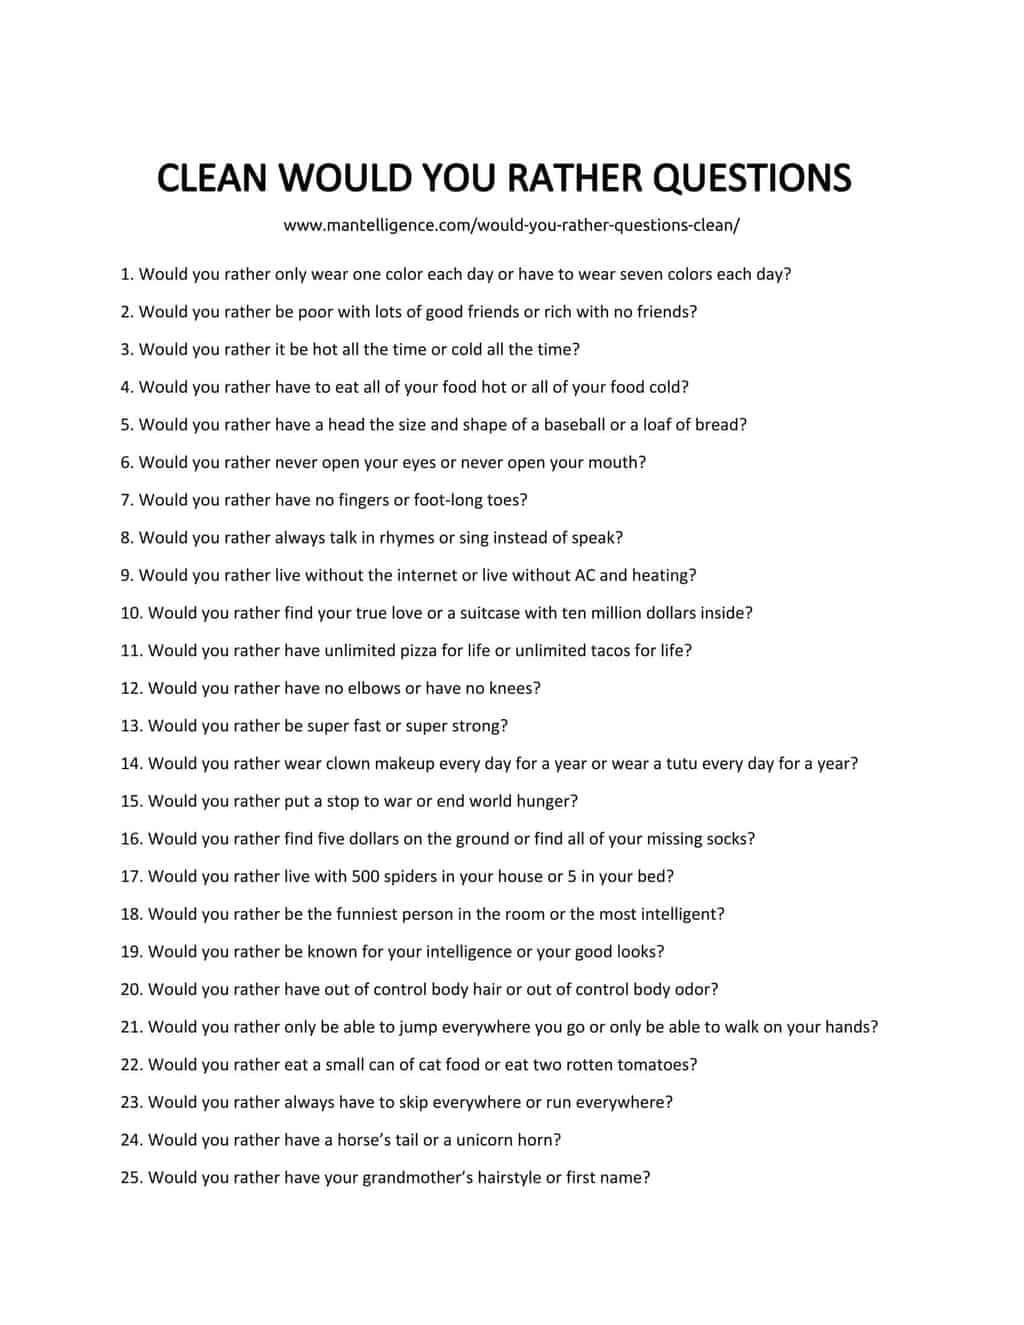 List of CLEAN WOULD YOU RATHER QUESTIONS-1